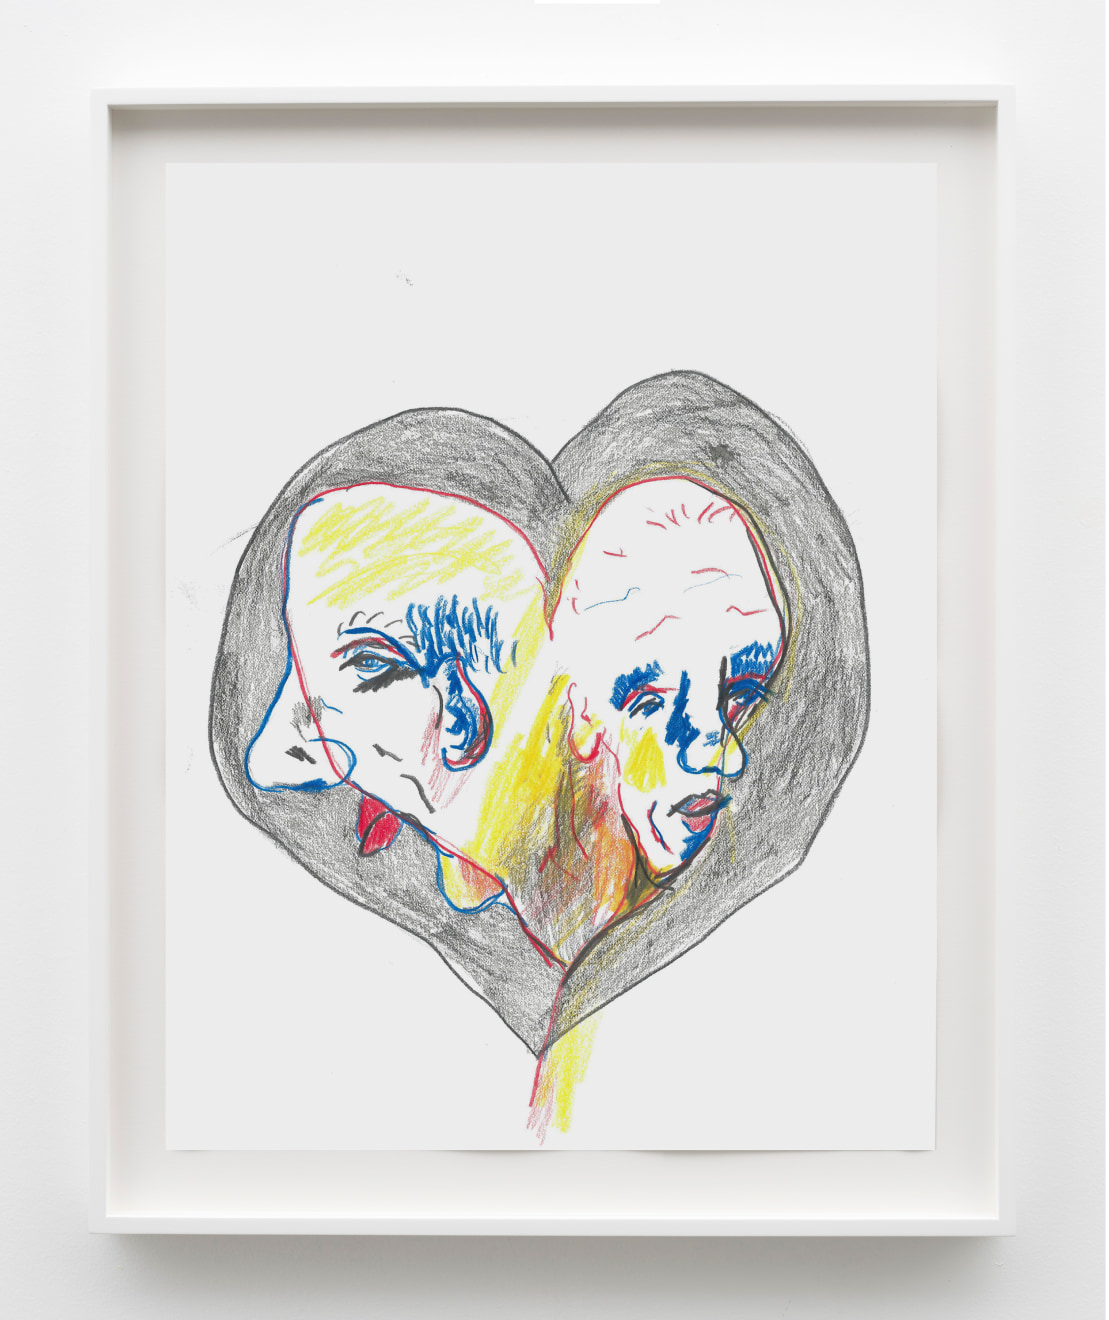 Joel Mesler, Heart With the Two Faces, 2016